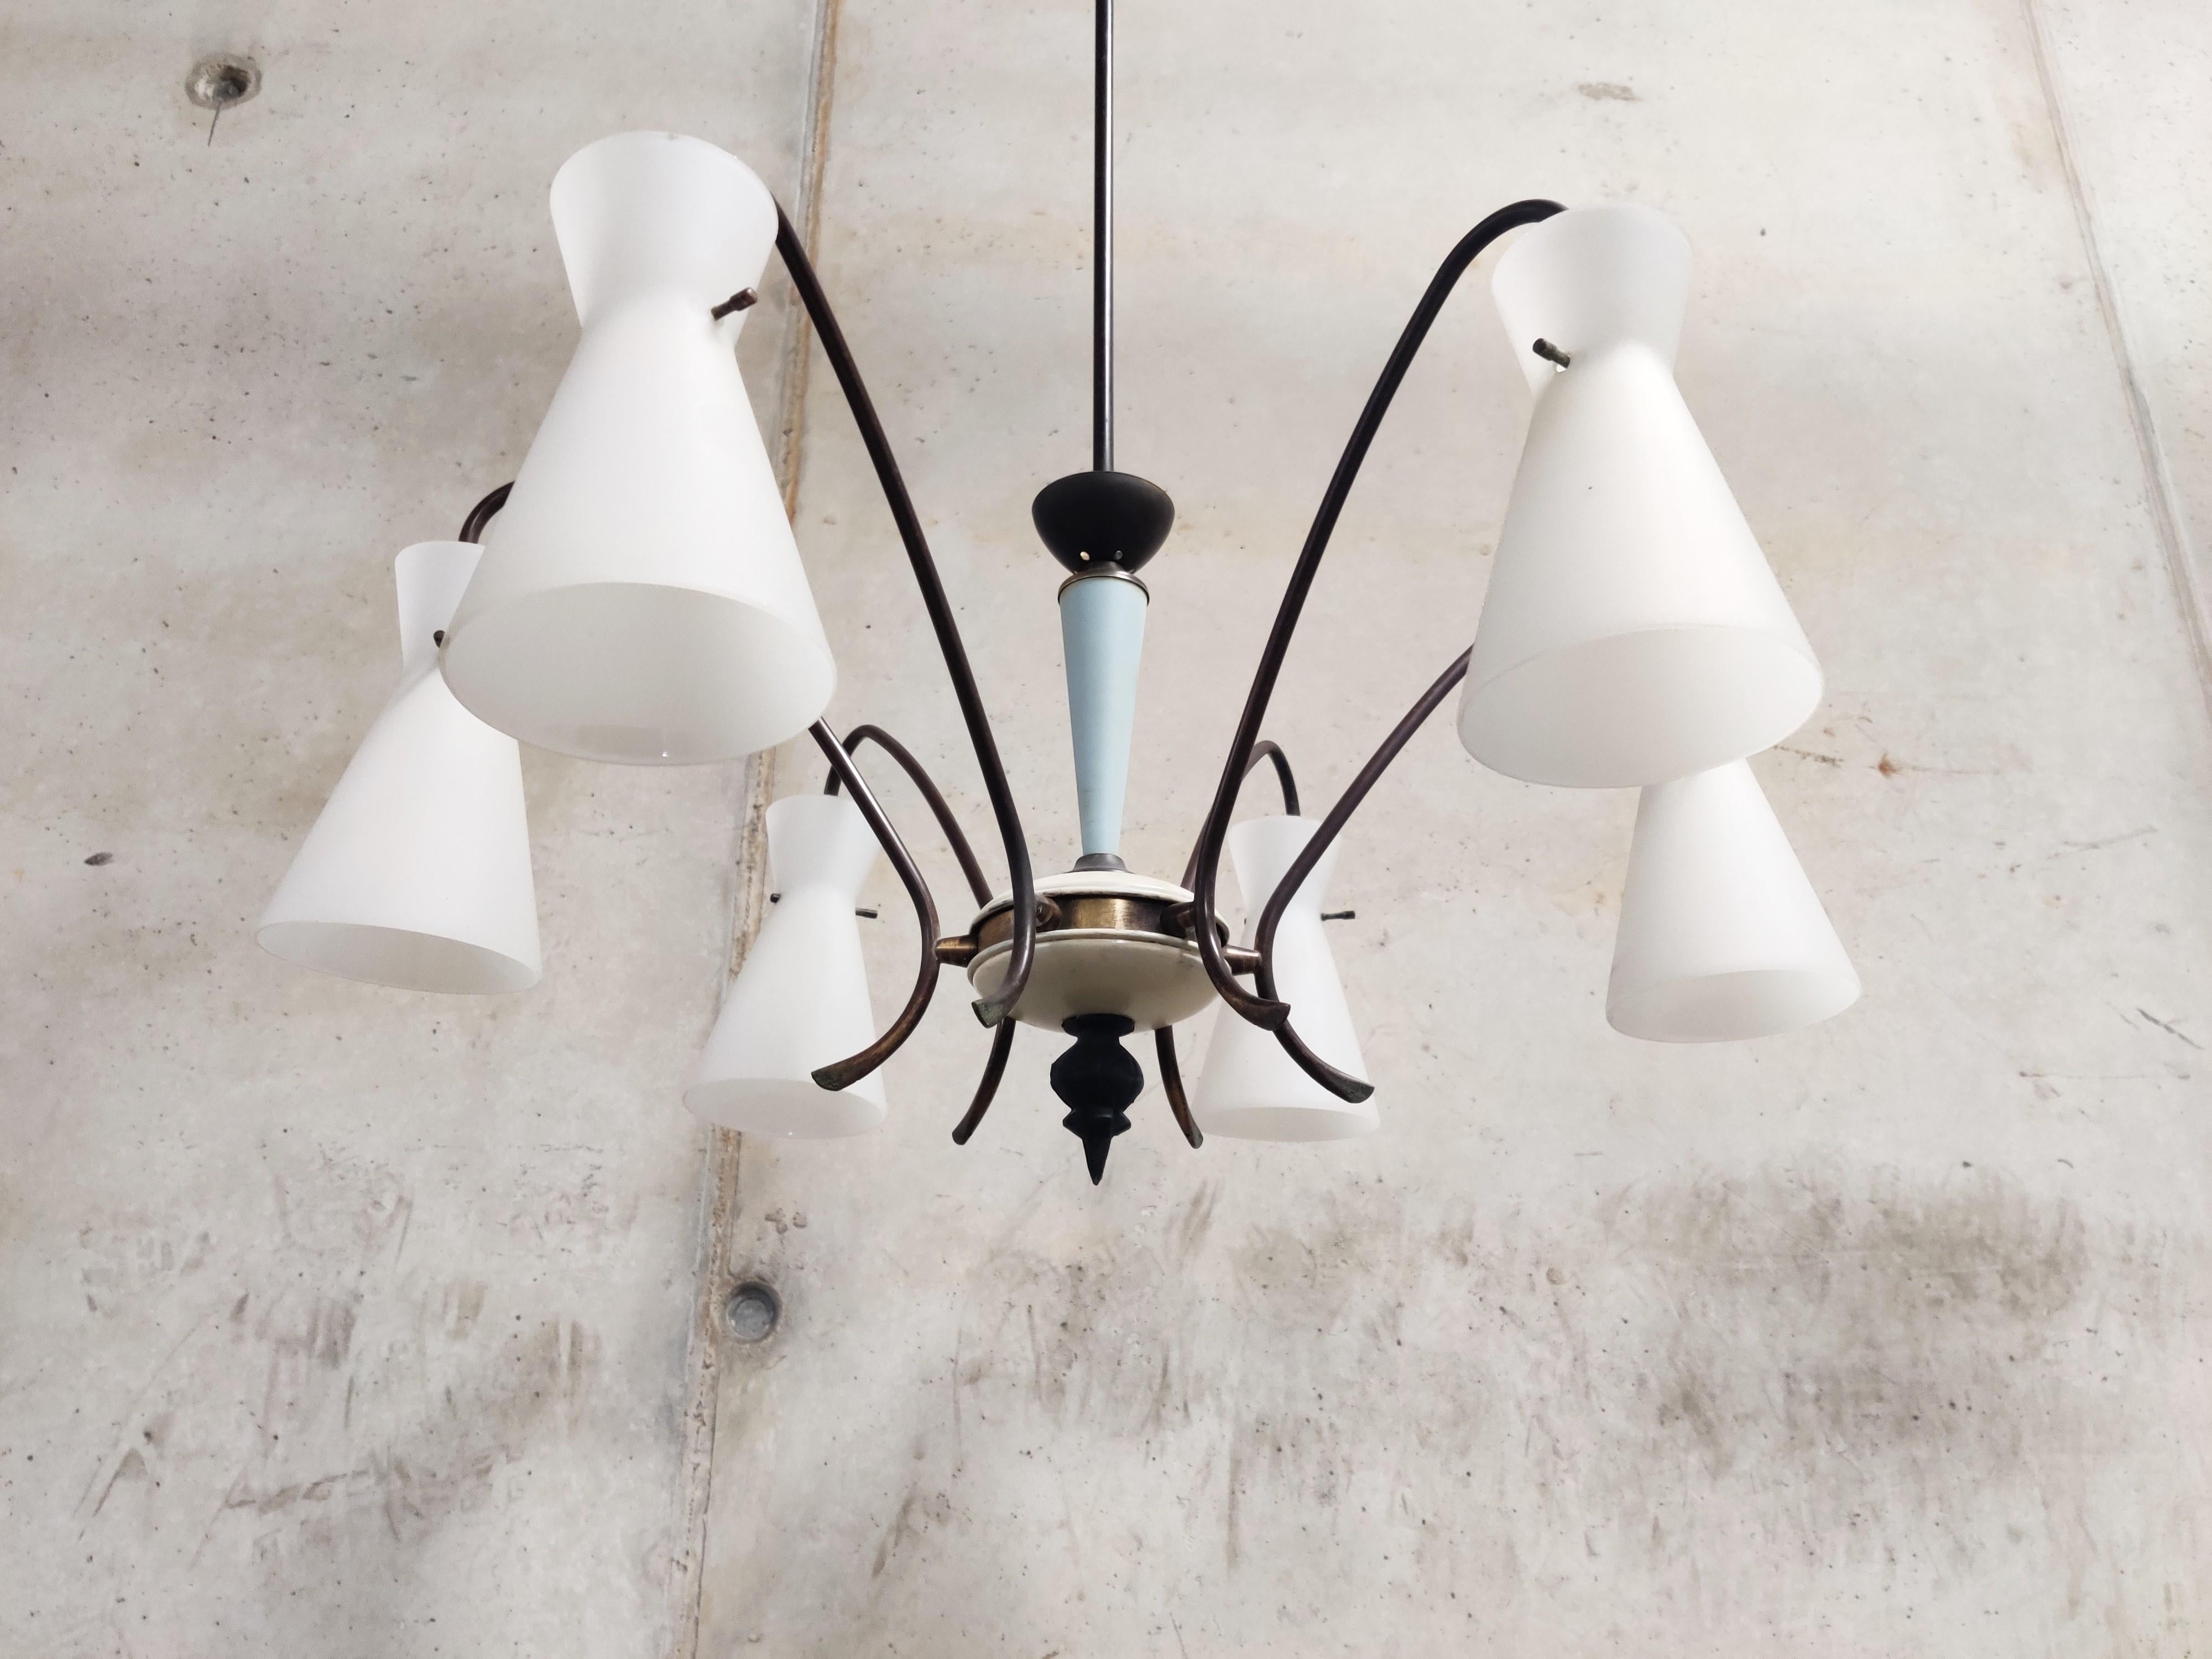 Italian chandelier with 6 lightpoints.

Patinated brass 'spider' chandelier with white glass 'diabolo' lamp shades.

Blue center piece and cast metal finial.

1950s - Italy

Works with regular E14 light bulbs.

Original condition,